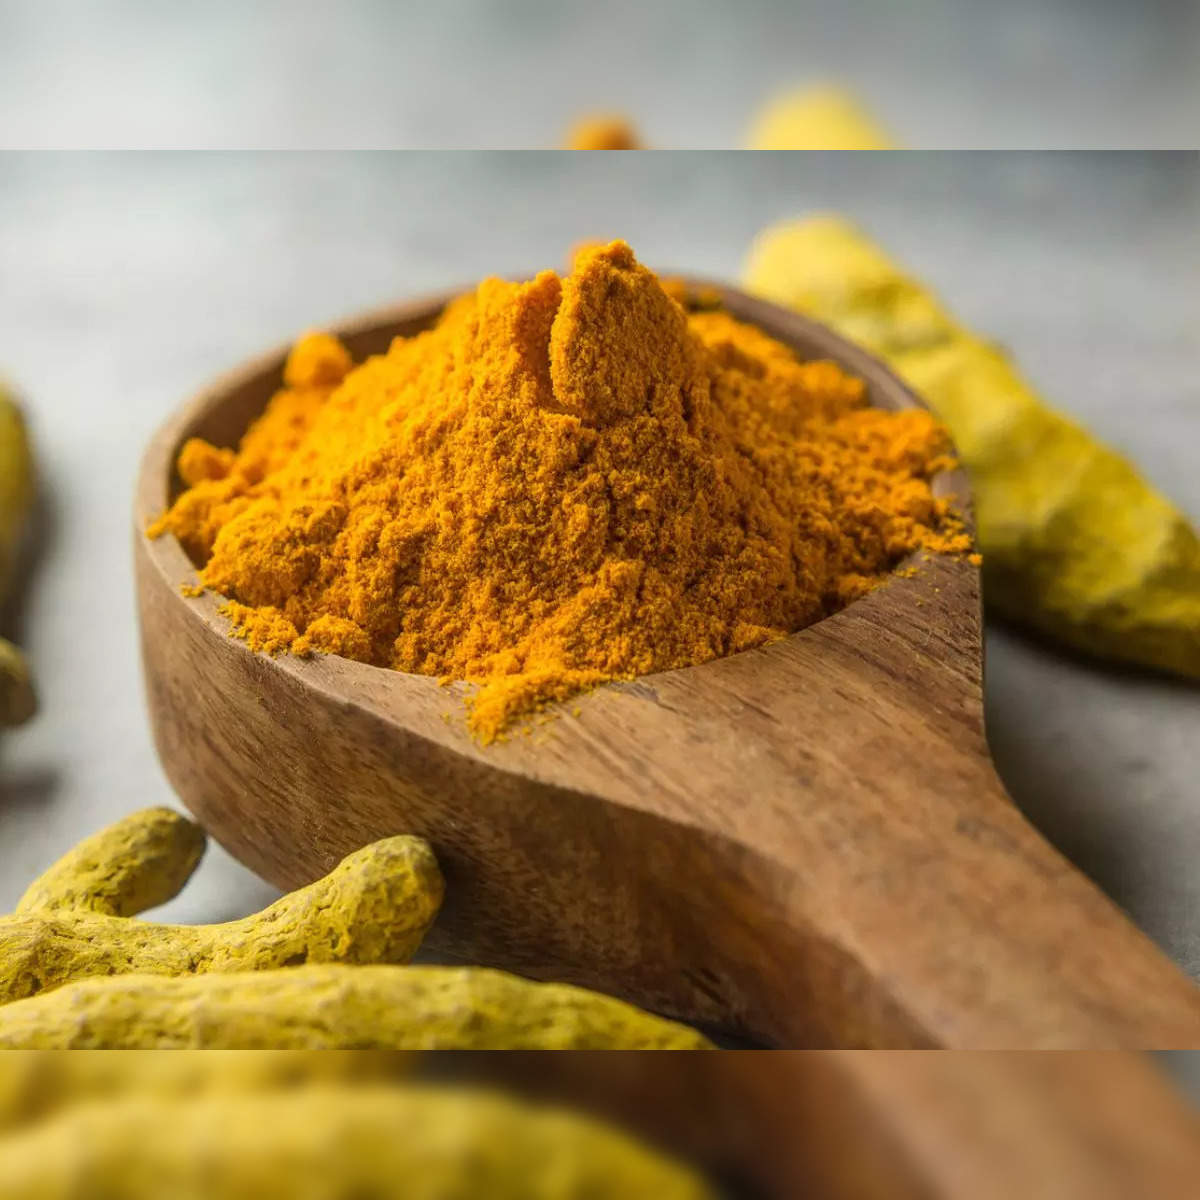 Is turmeric good for you? Yes, but It's complicated.